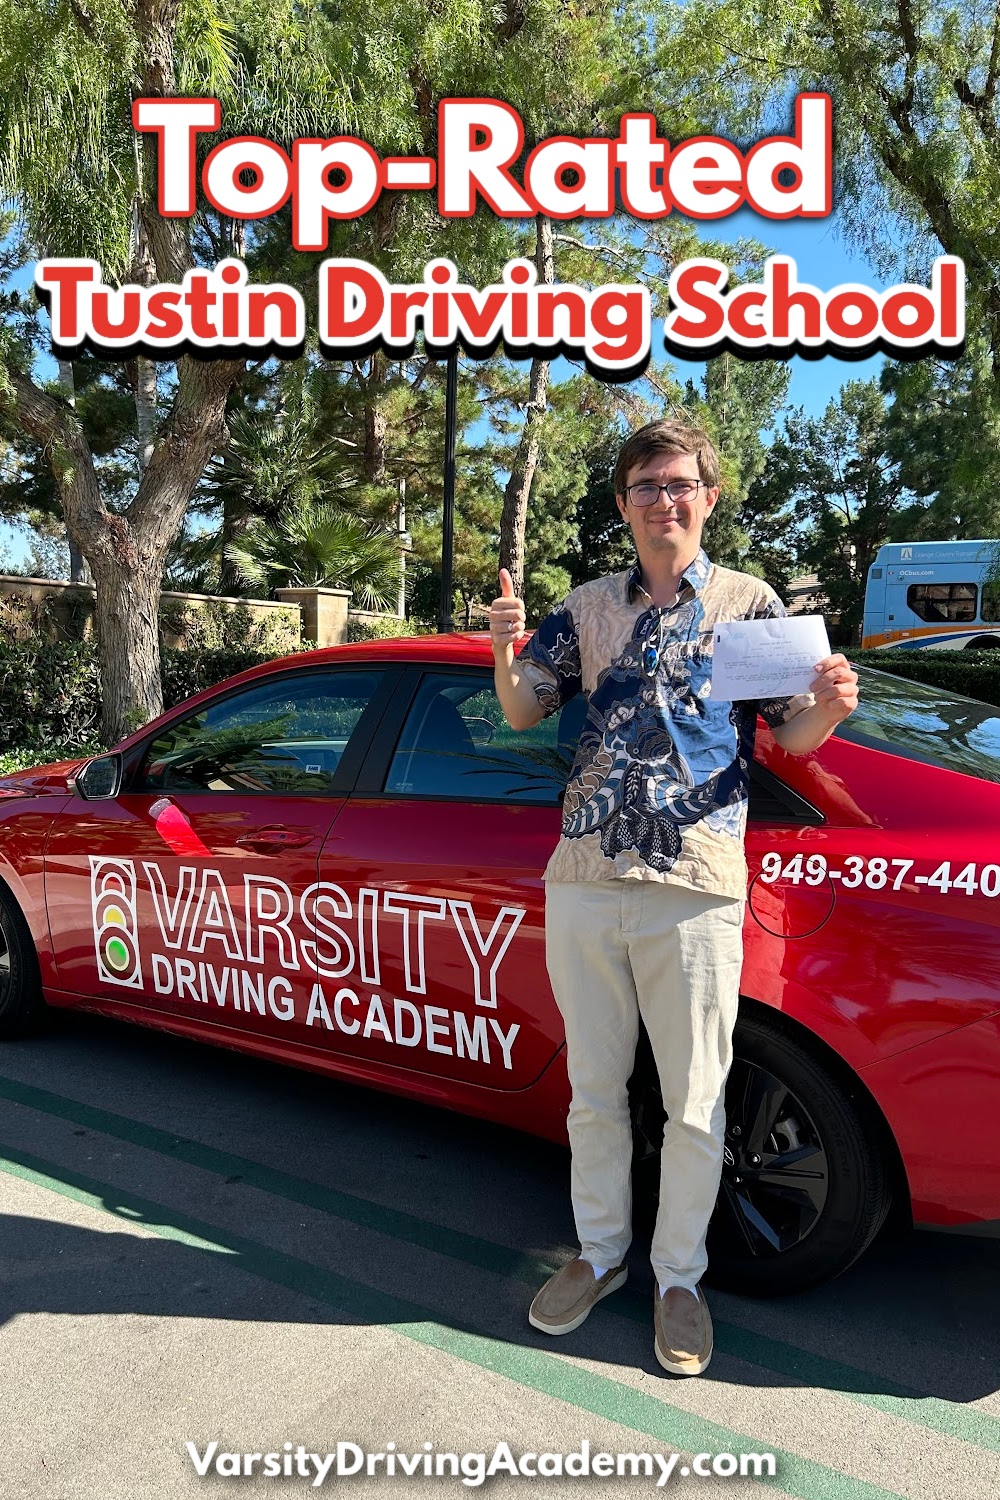 Varsity Driving School is the top rated Tustin Driving School where teens and adults can learn how to drive safely and defensively.